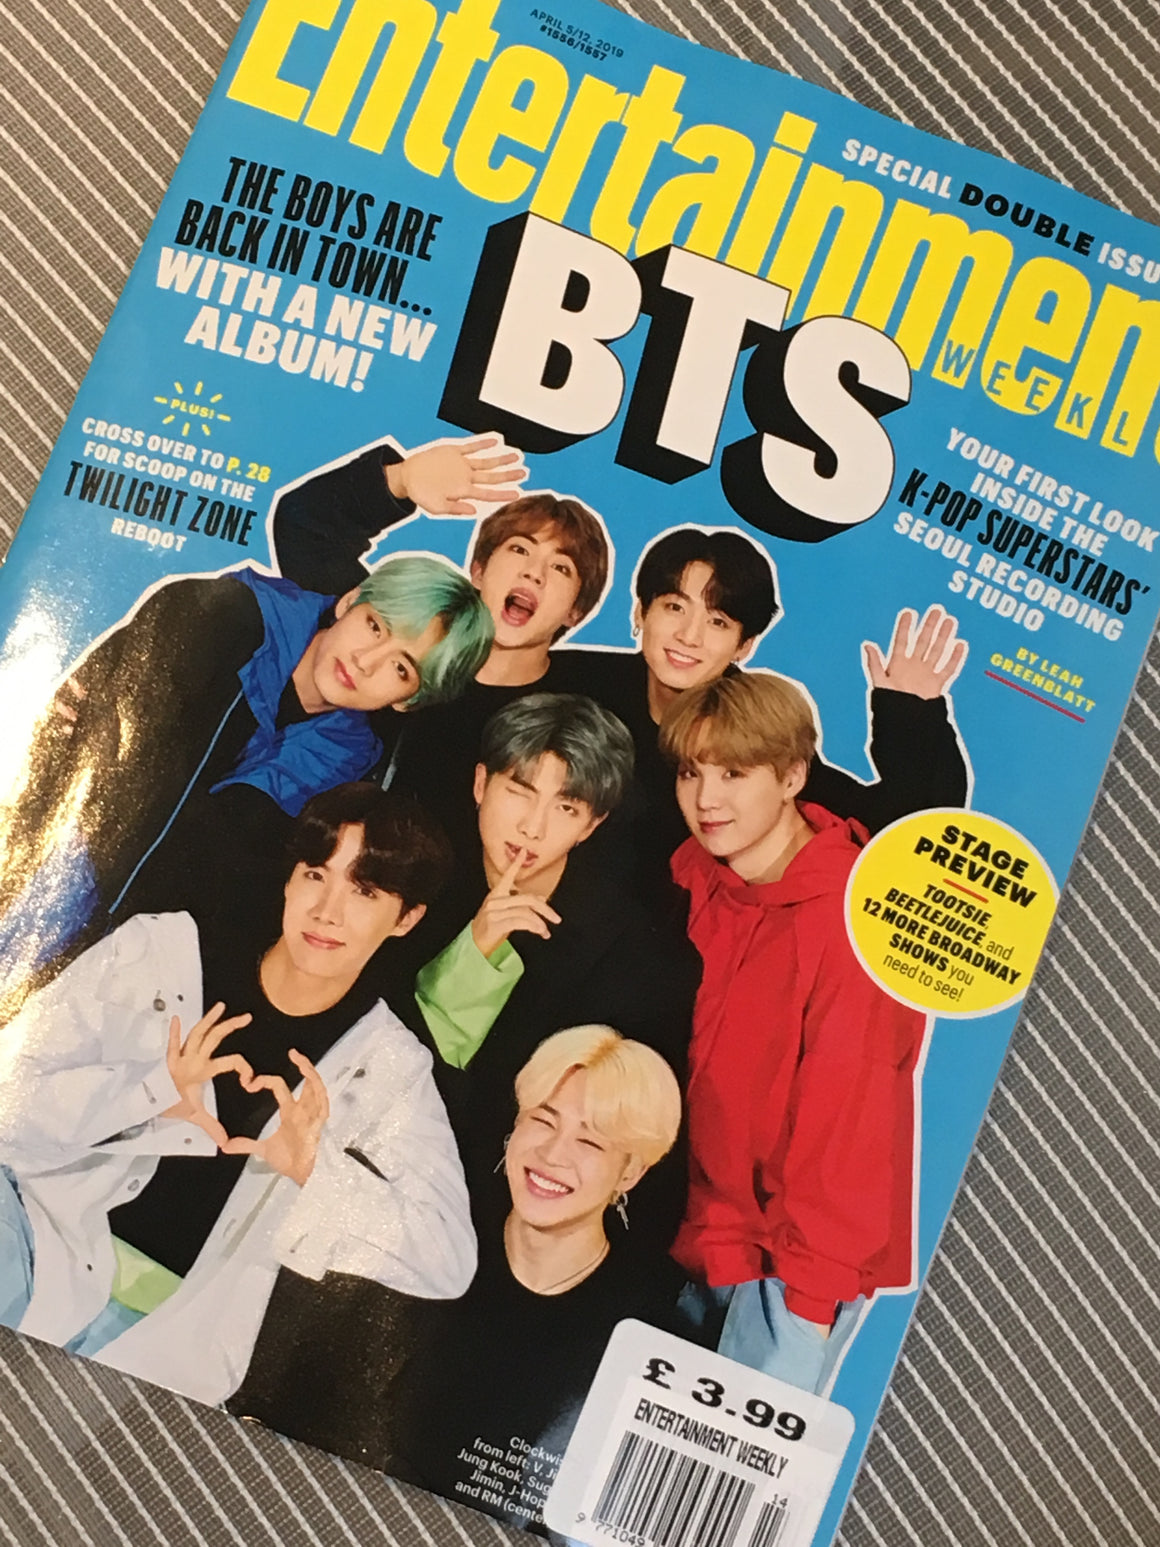 US ENTERTAINMENT WEEKLY MAGAZINE APRIL 5th 2019: BTS COVER STORY